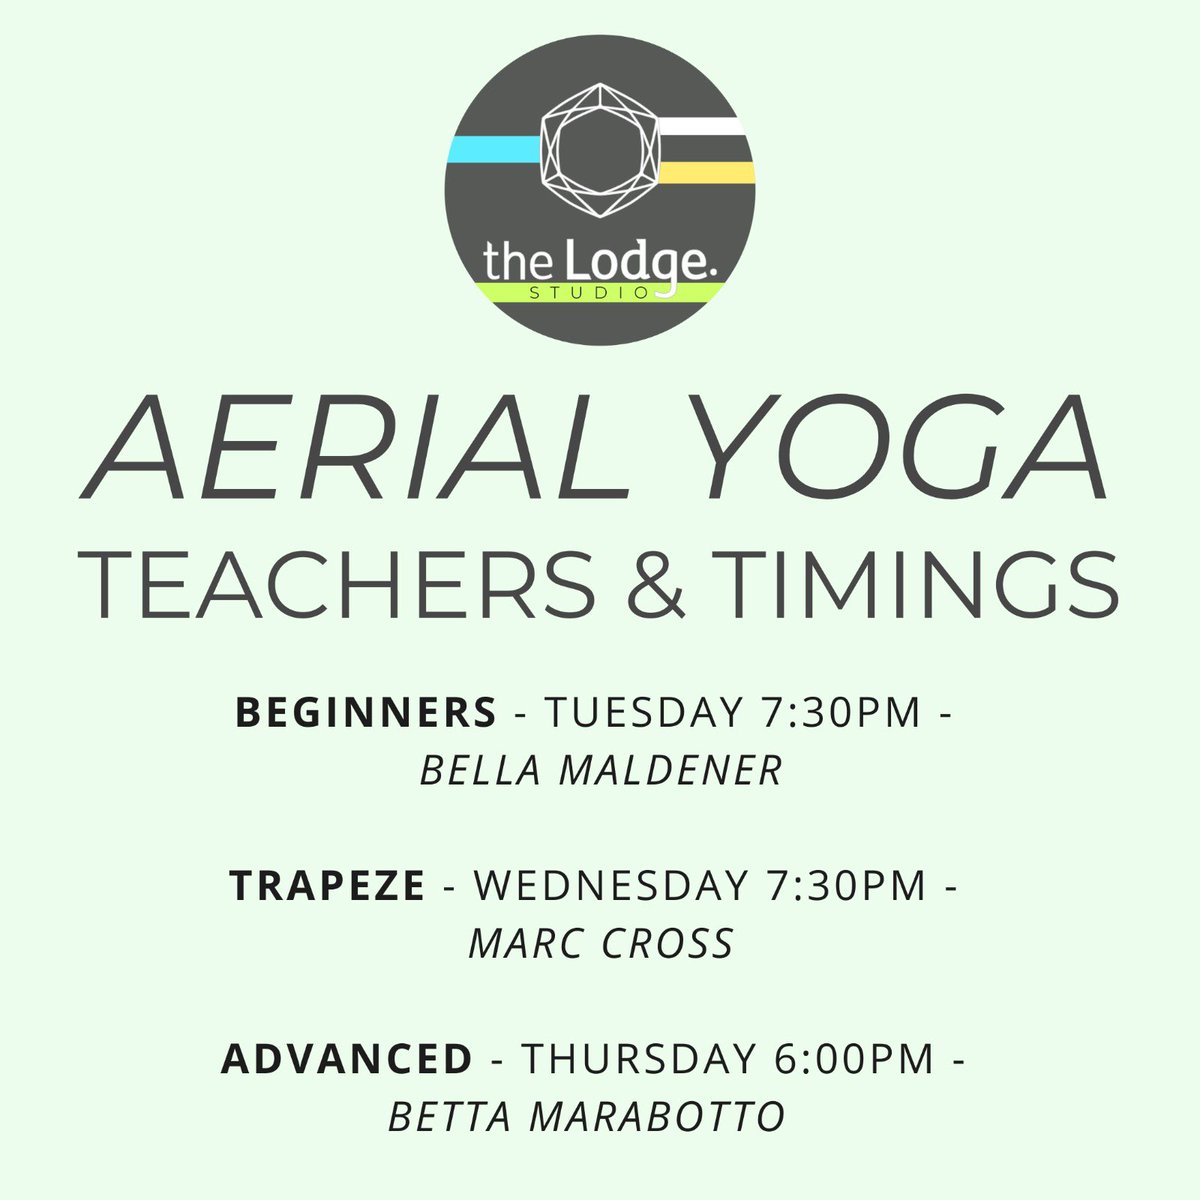 AERIAL YOGA returns! Slide through the attached images to find out about Lodge Aerial Memberships, Other Memberships that Aerial Applies with & Aerial Teachers & Class Timings! #lodgeaerialreturns #aerialyoga